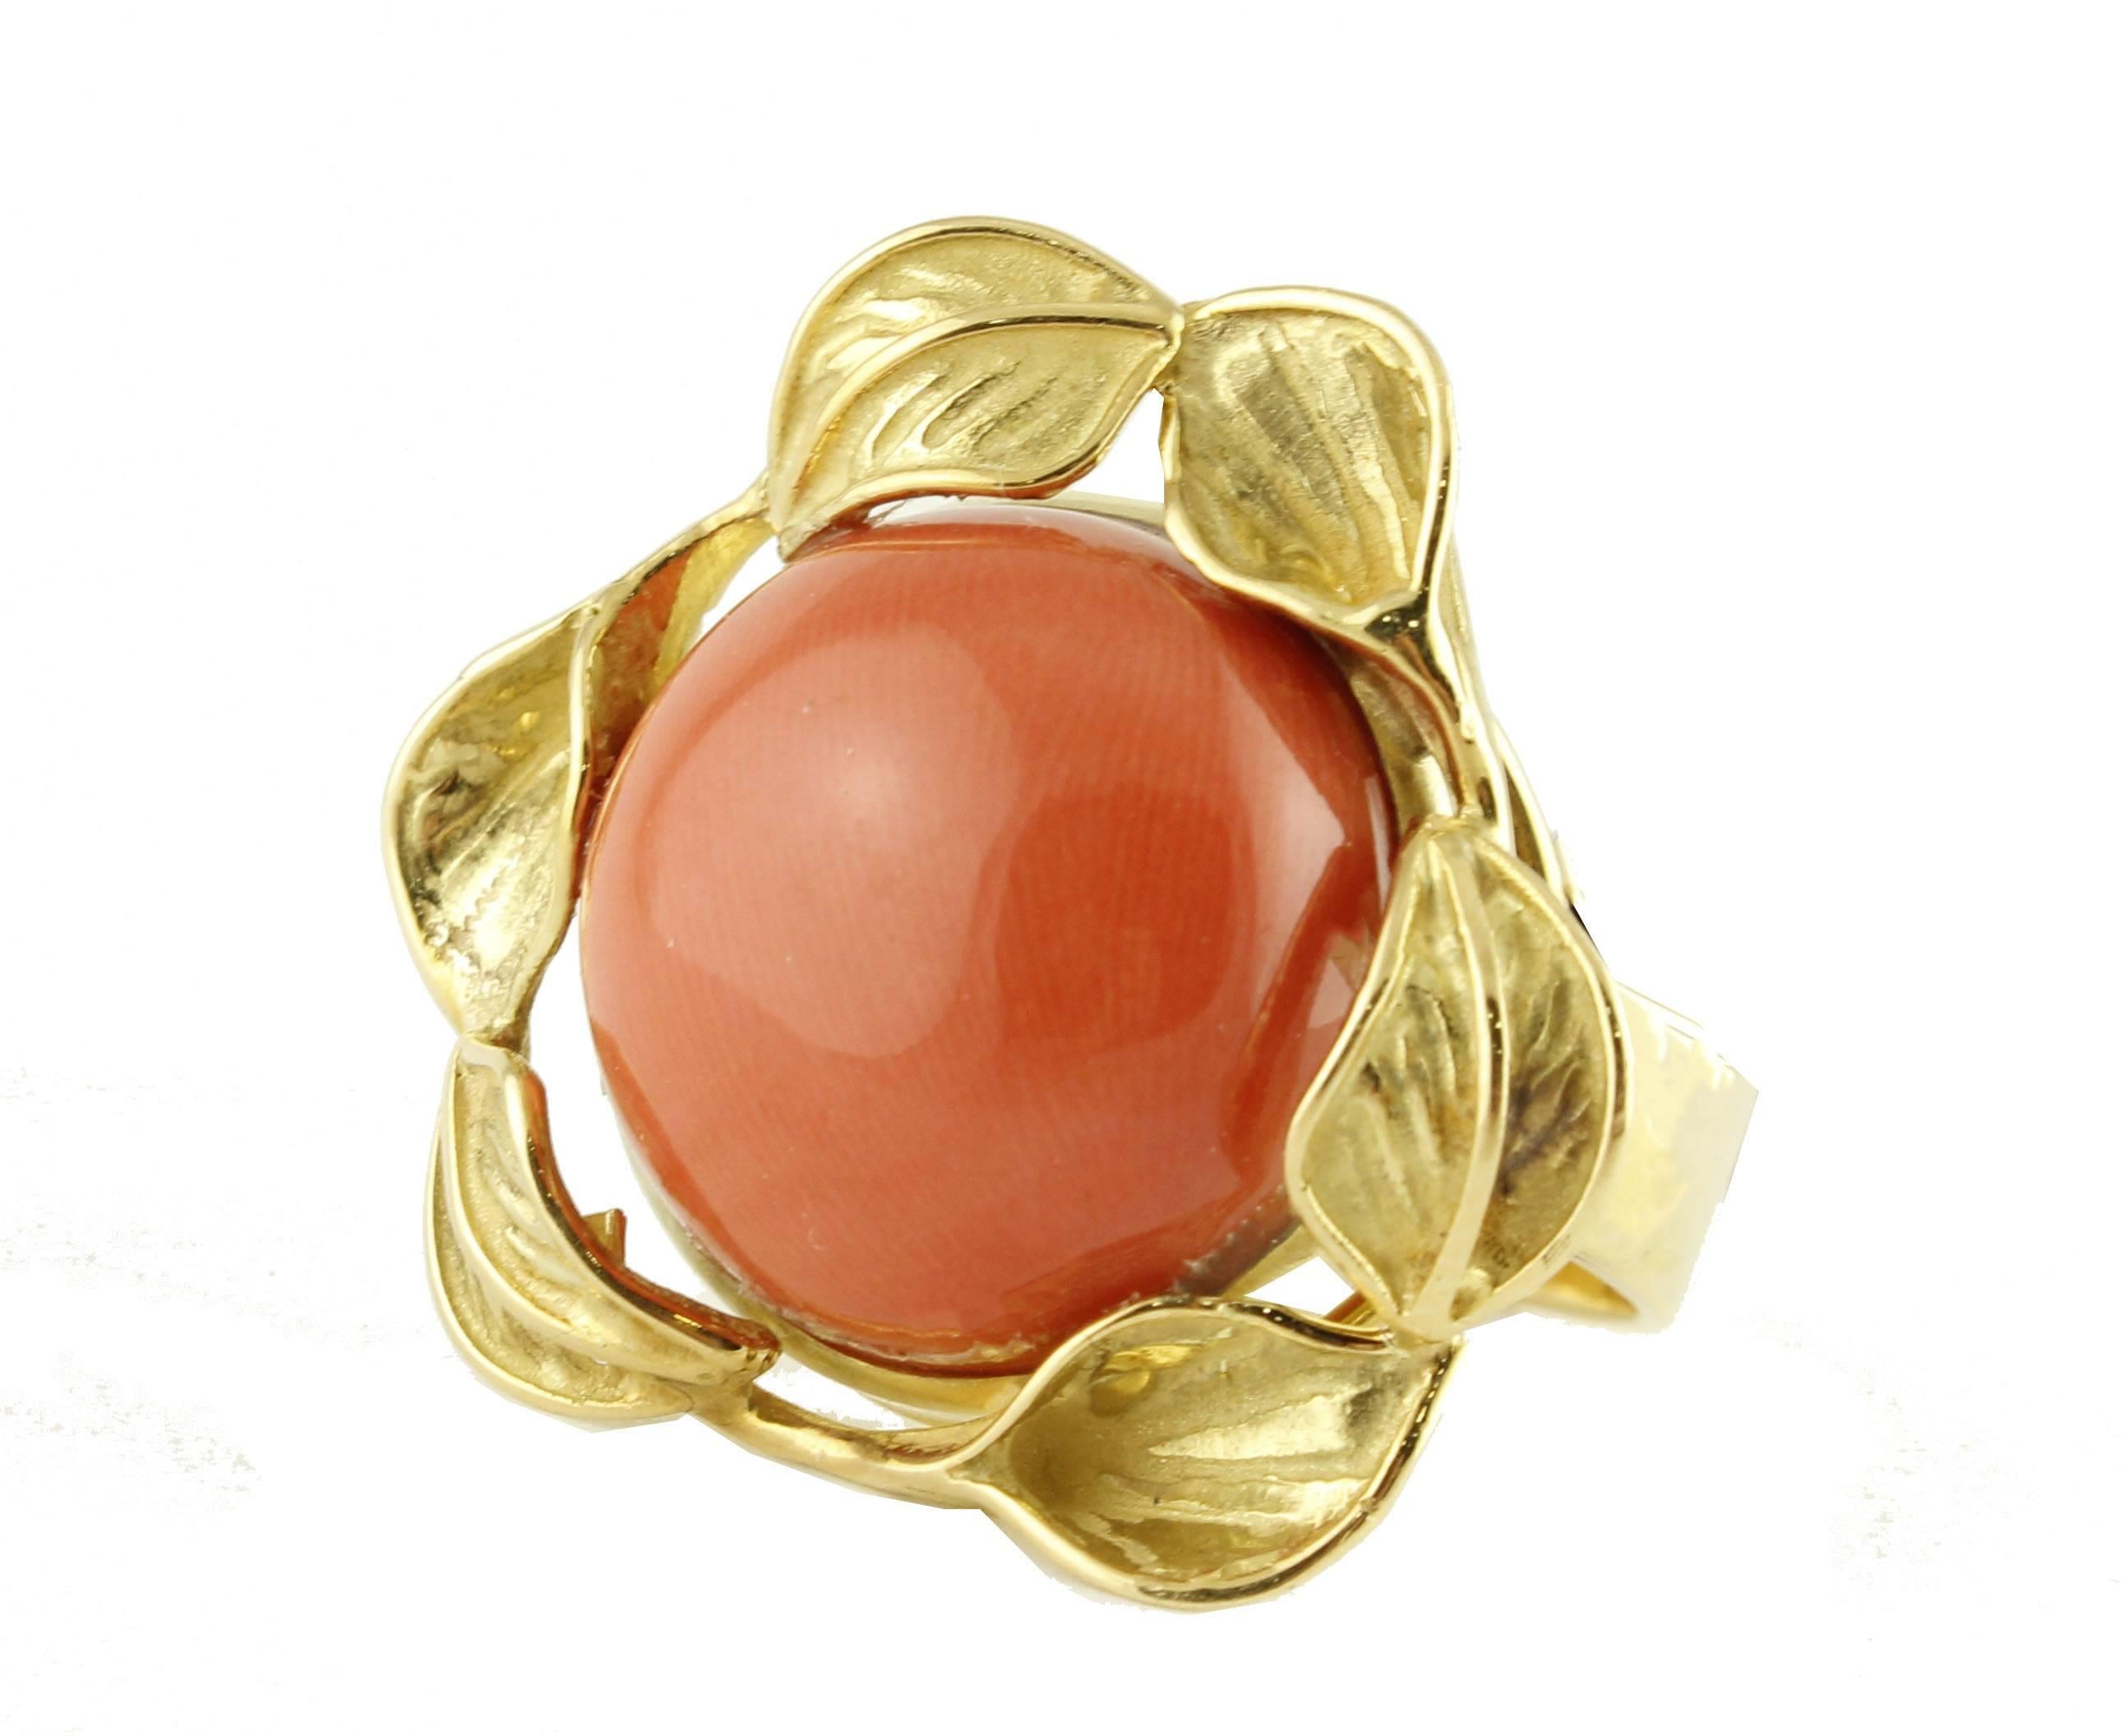 Fabulous ring in yellow gold , with worked leaves all around a wonderful center coral button 
Coral g 3.80/ 16 mm
Total weight g 12.30
RF + uuee
Size Italian 15
Size French 55
Size Usa 7.17

For any enquires, please contact the seller through the